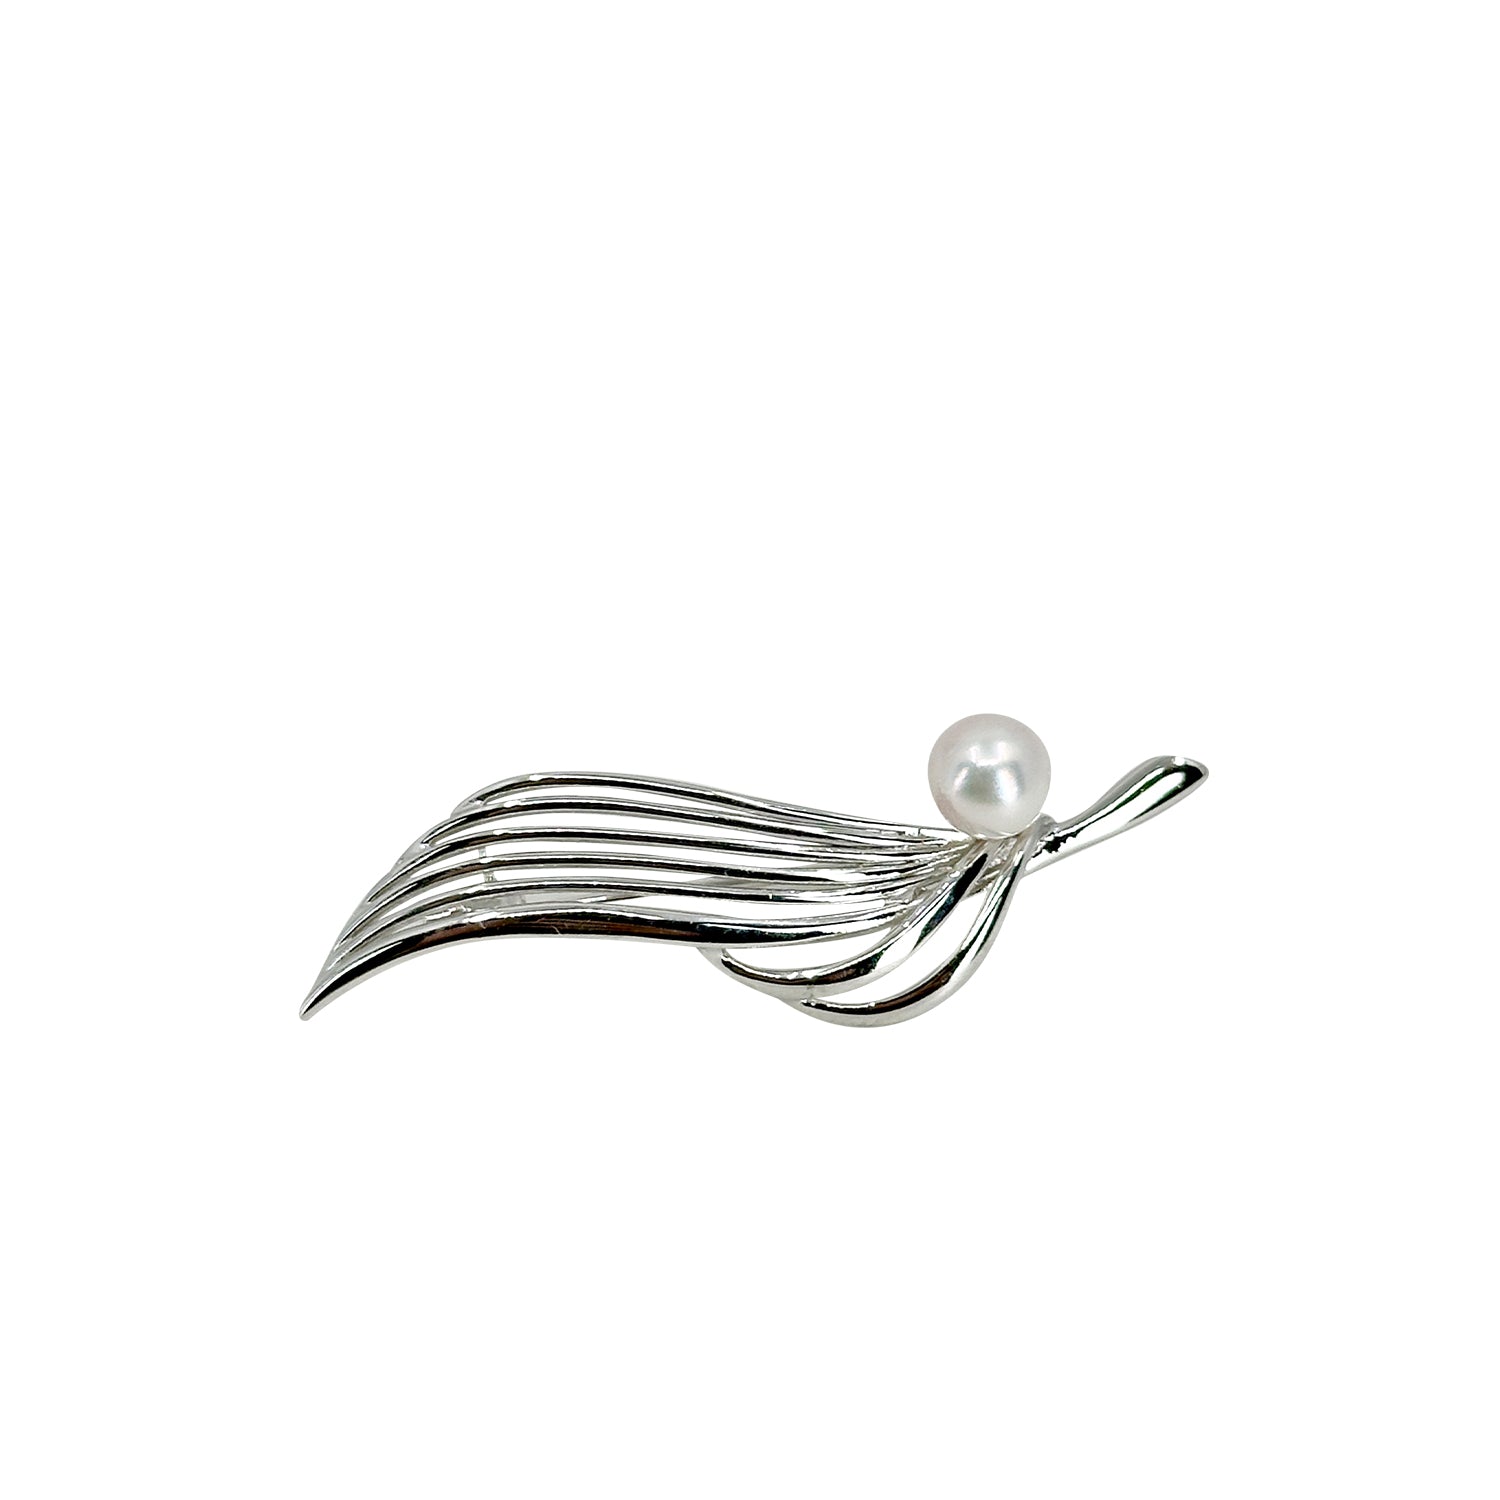 Pearl Brooch Branch Genuine Cultured Pearl Jewelry Sterling Silver 1950s 